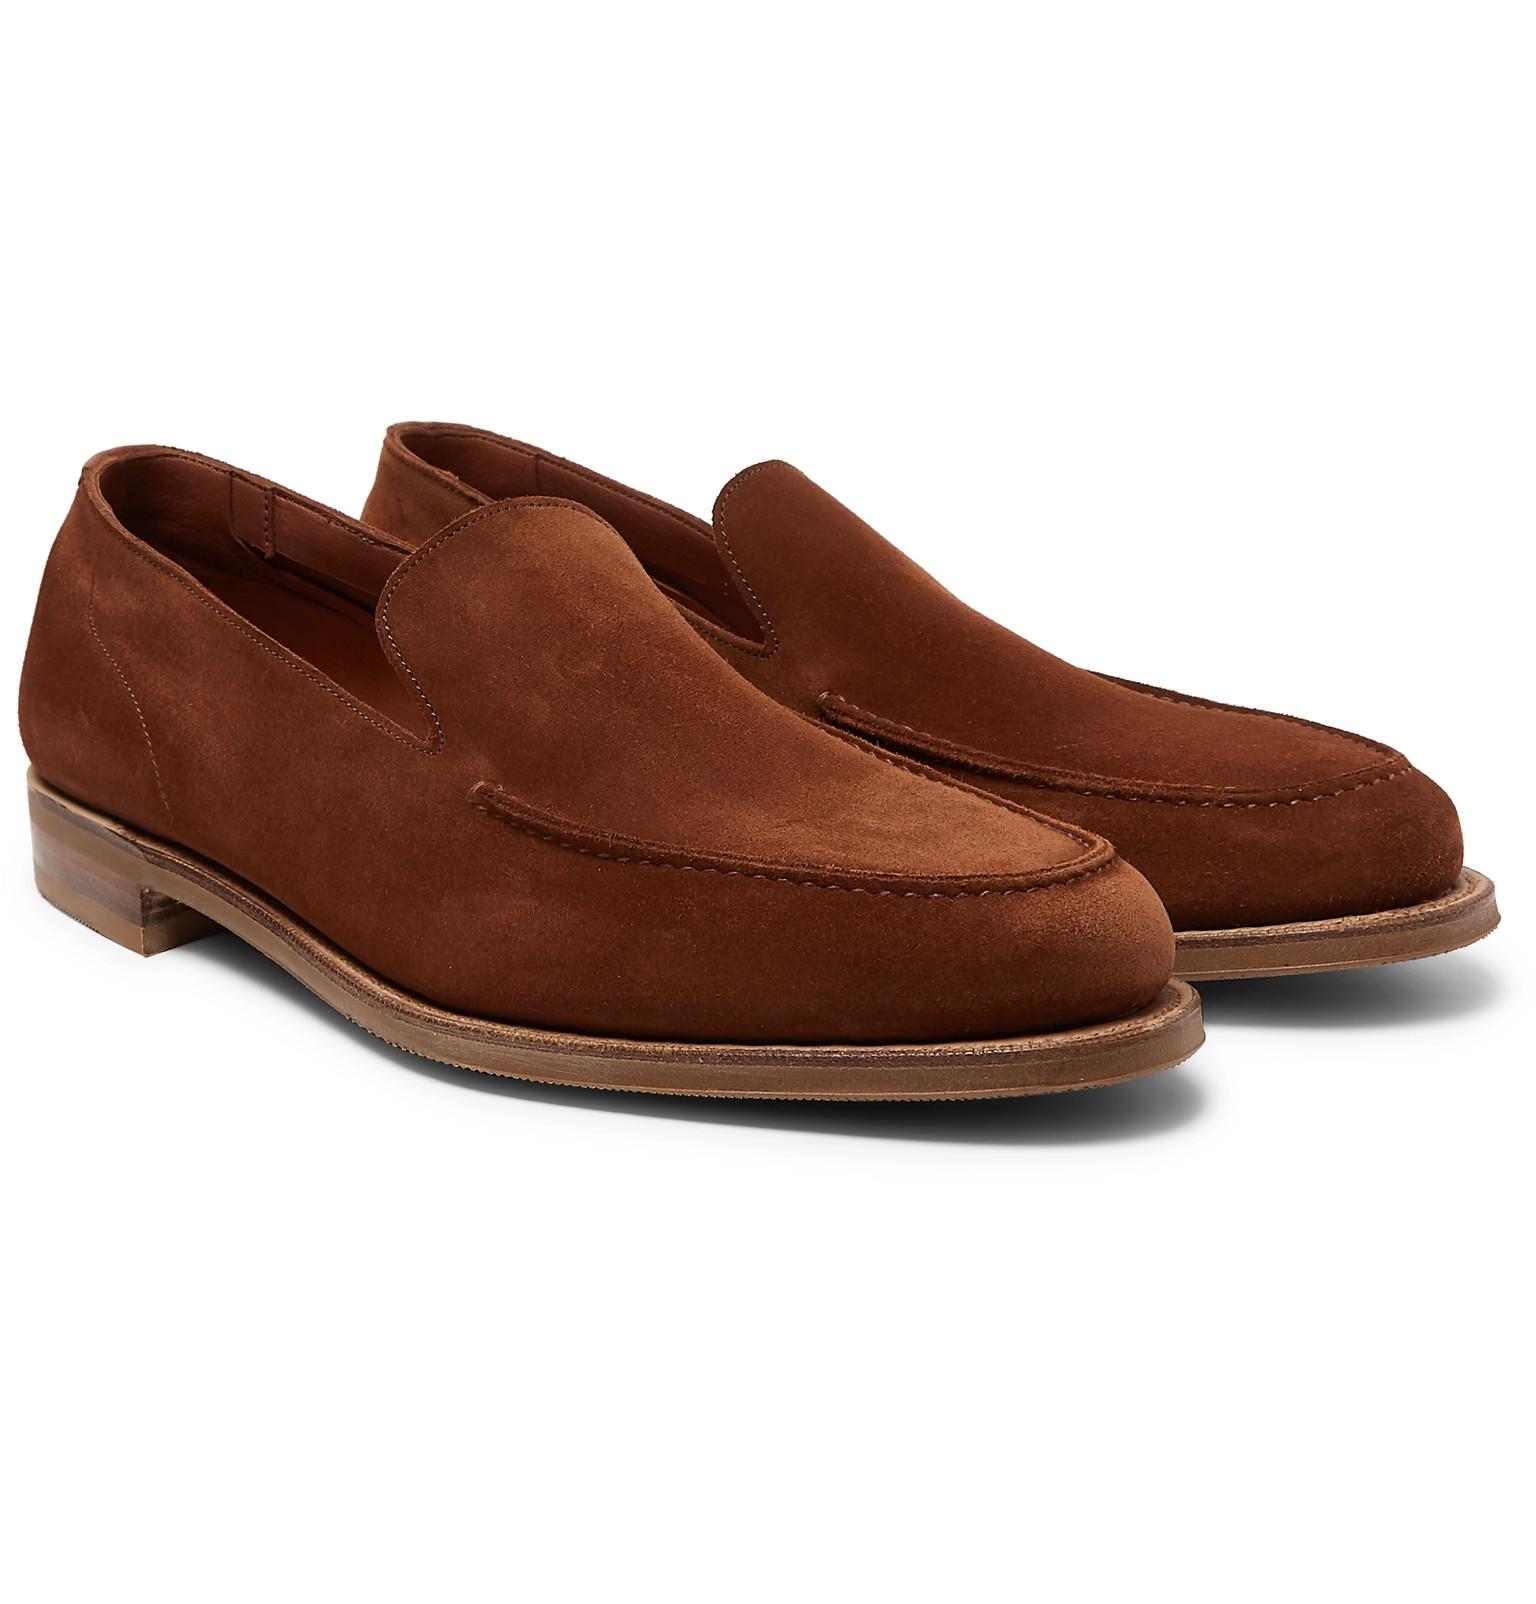 Edward Green Islington Suede Loafers in Light Brown (Brown) for Men - Lyst